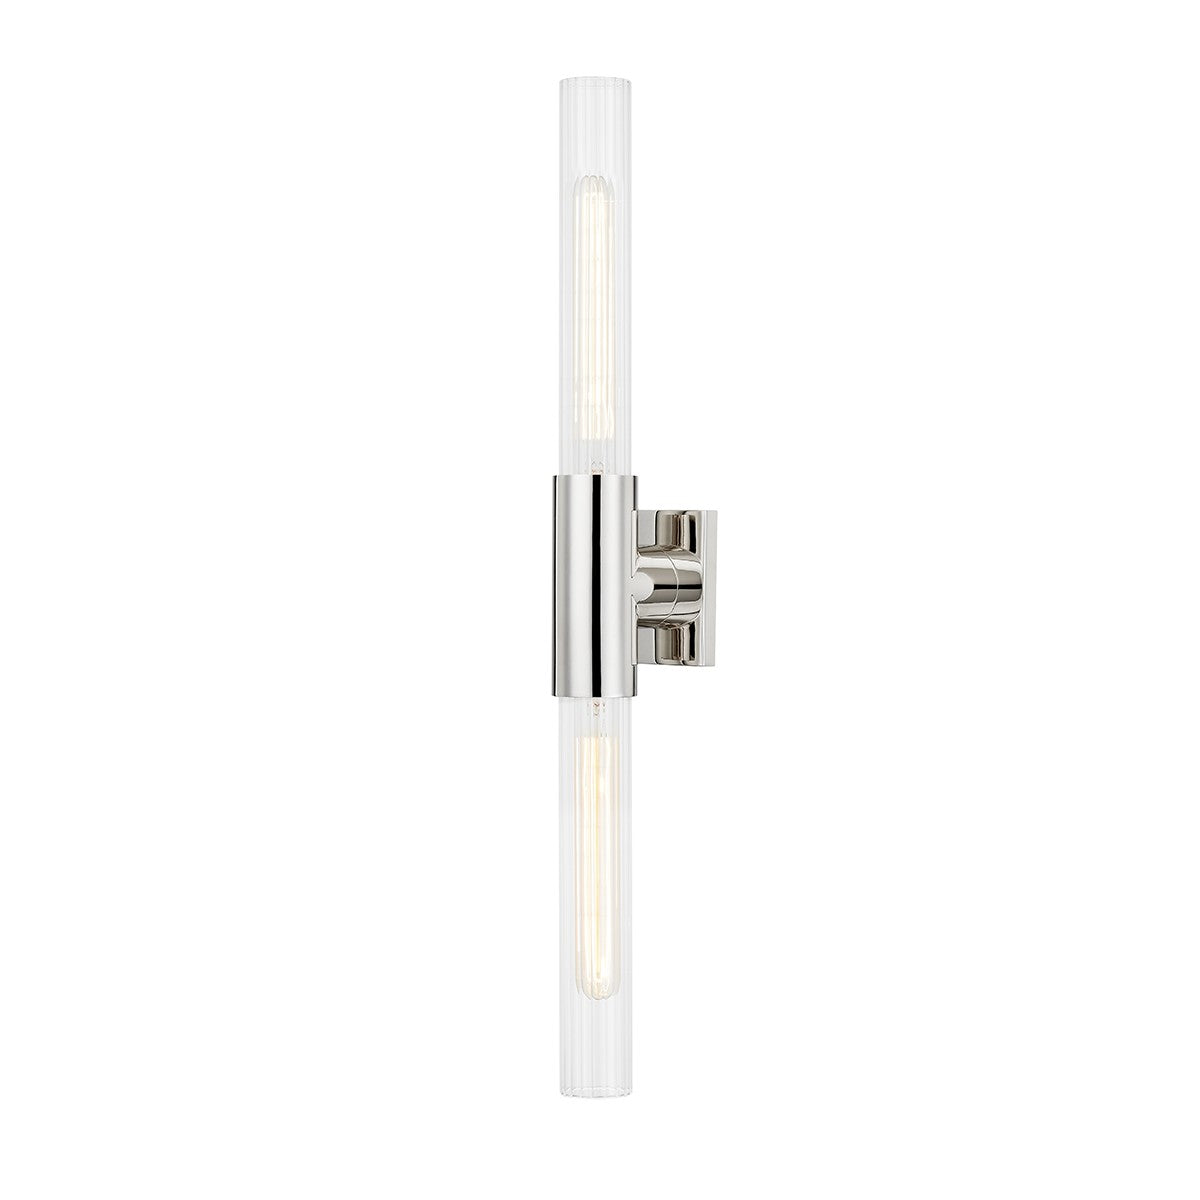 Hudson Valley - 1202-PN - Two Light Wall Sconce - Asher - Polished Nickel